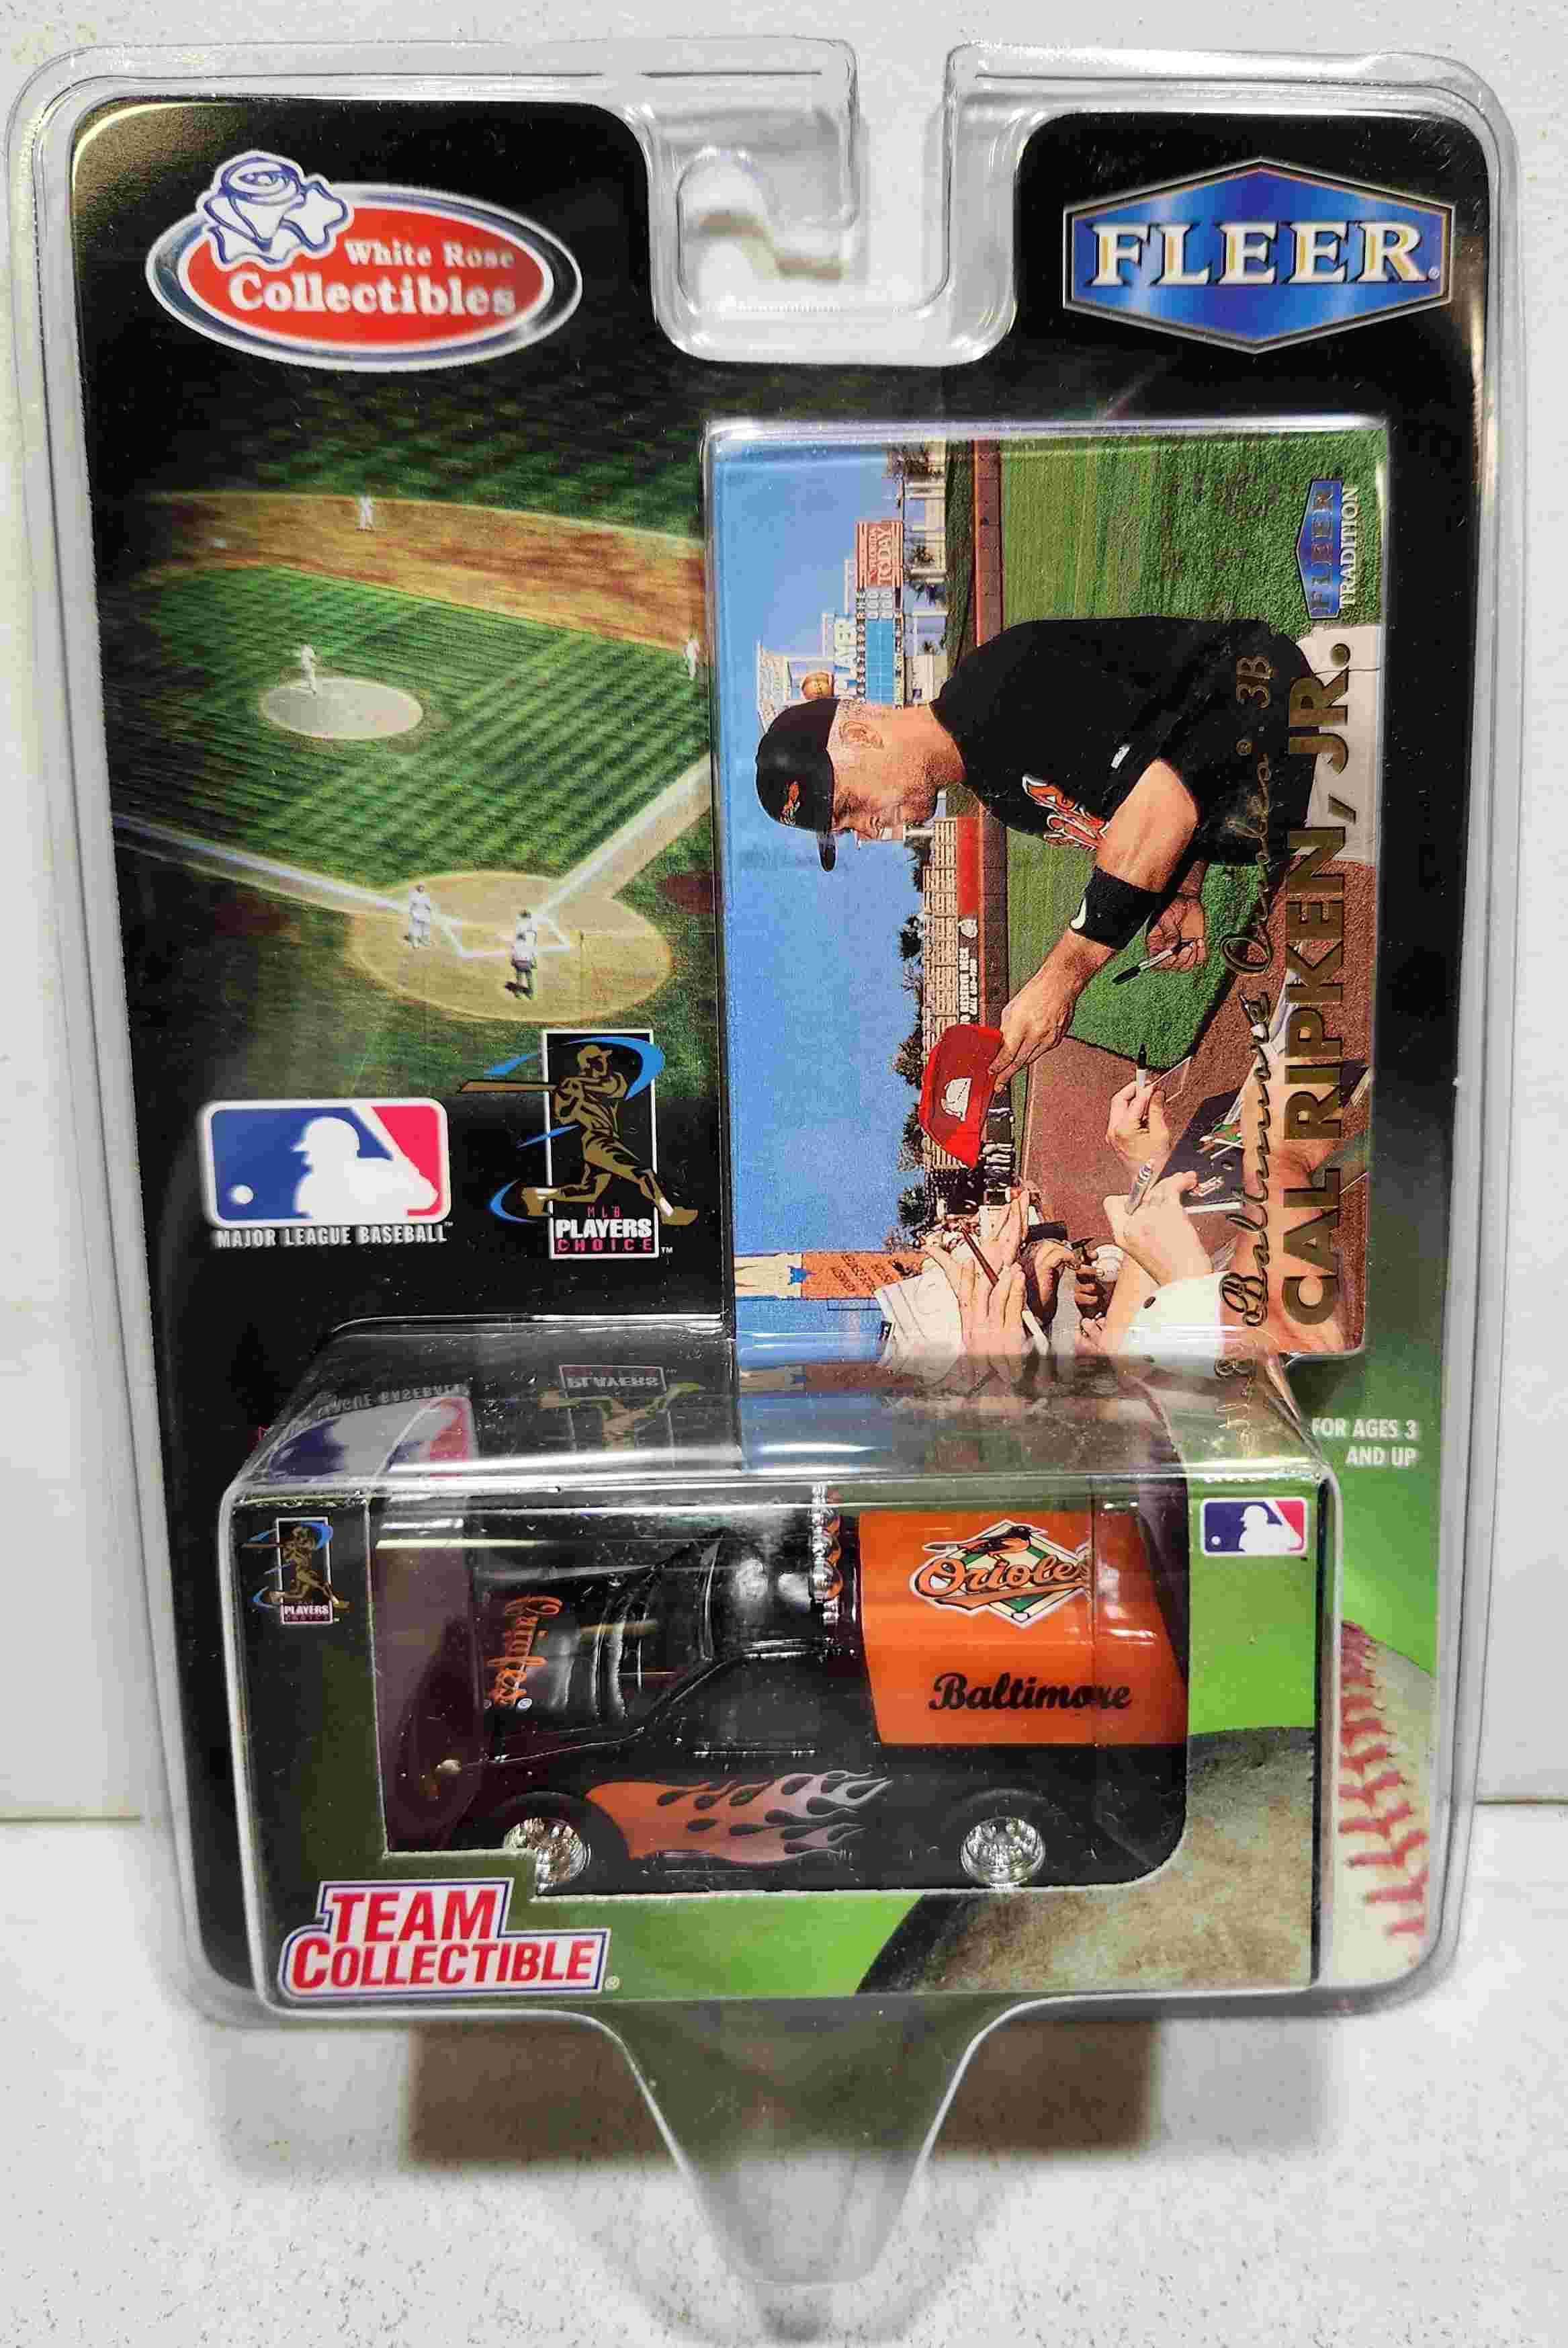 1999 Baltimore Orioles 1/64th Ford F-150 Pickup with Cal Ripken Jr trading card